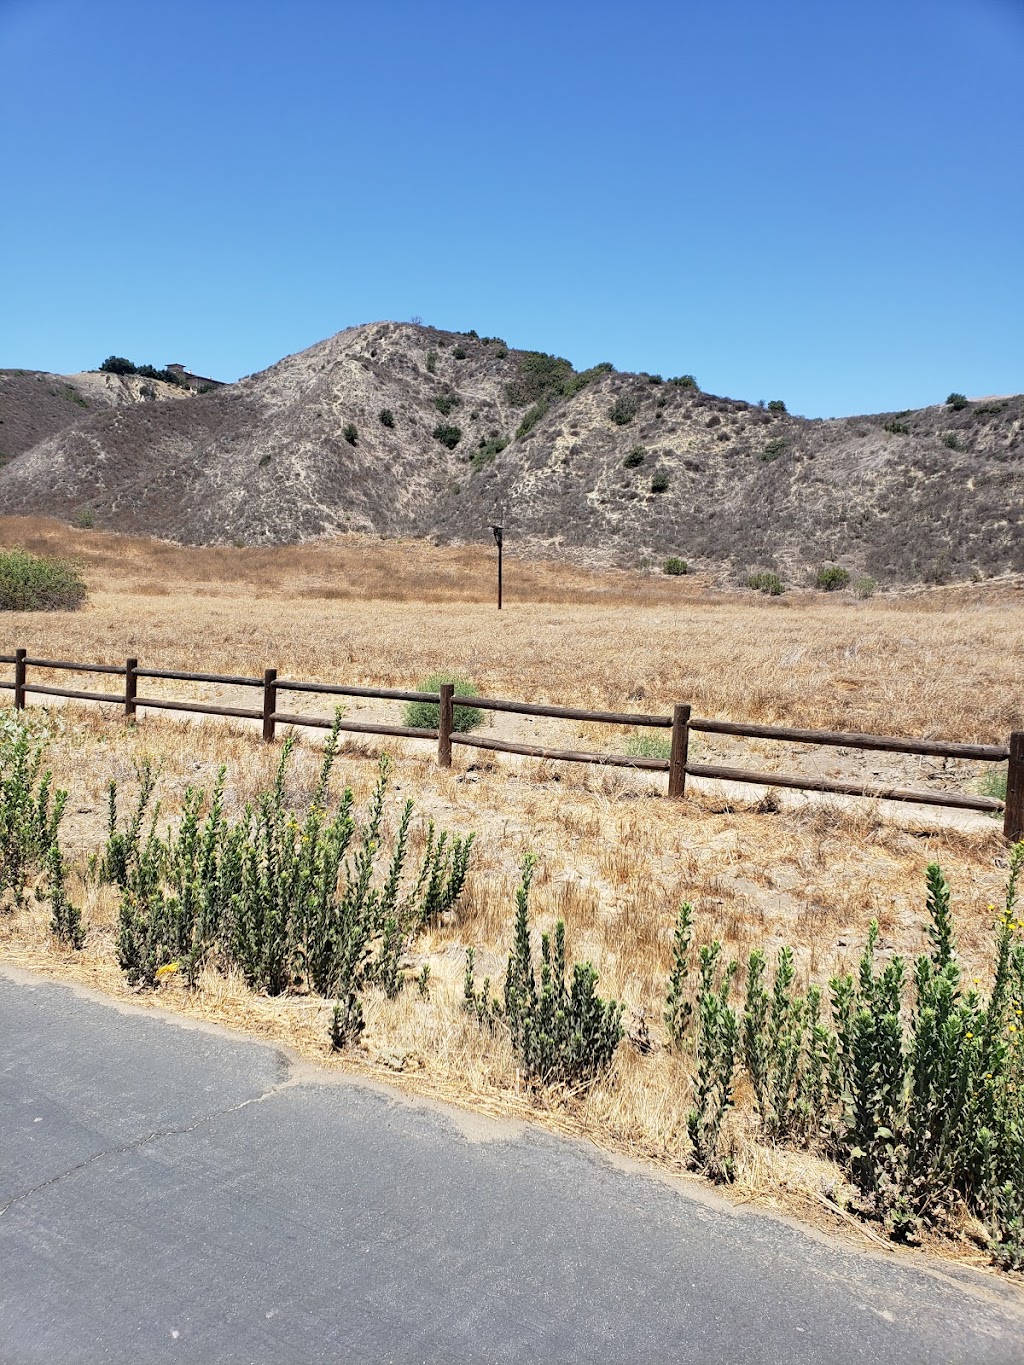 Aliso and Wood Canyons Wilderness Park | 28373 Alicia Pkwy, Aliso Viejo, CA 92656, USA | Phone: (949) 923-2200